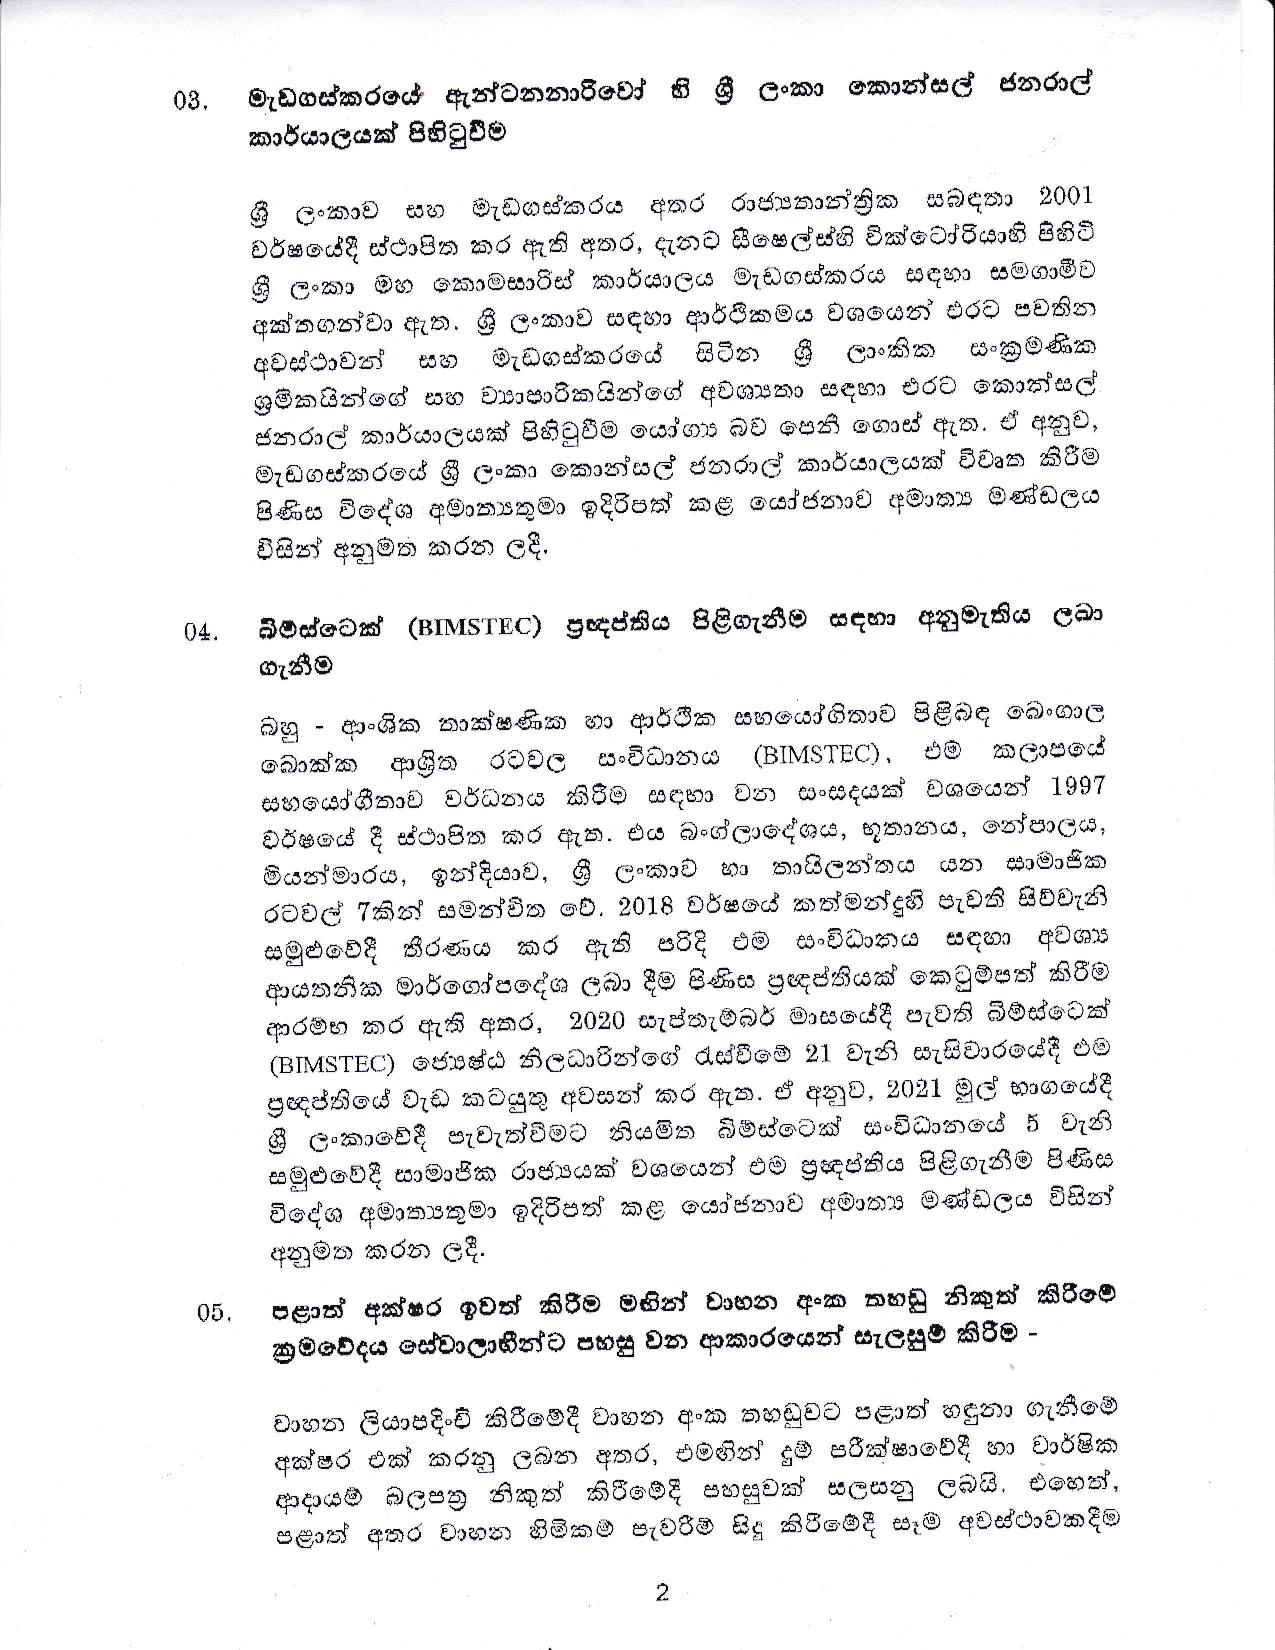 Cabinet Decision on 14.12.2020 page 002